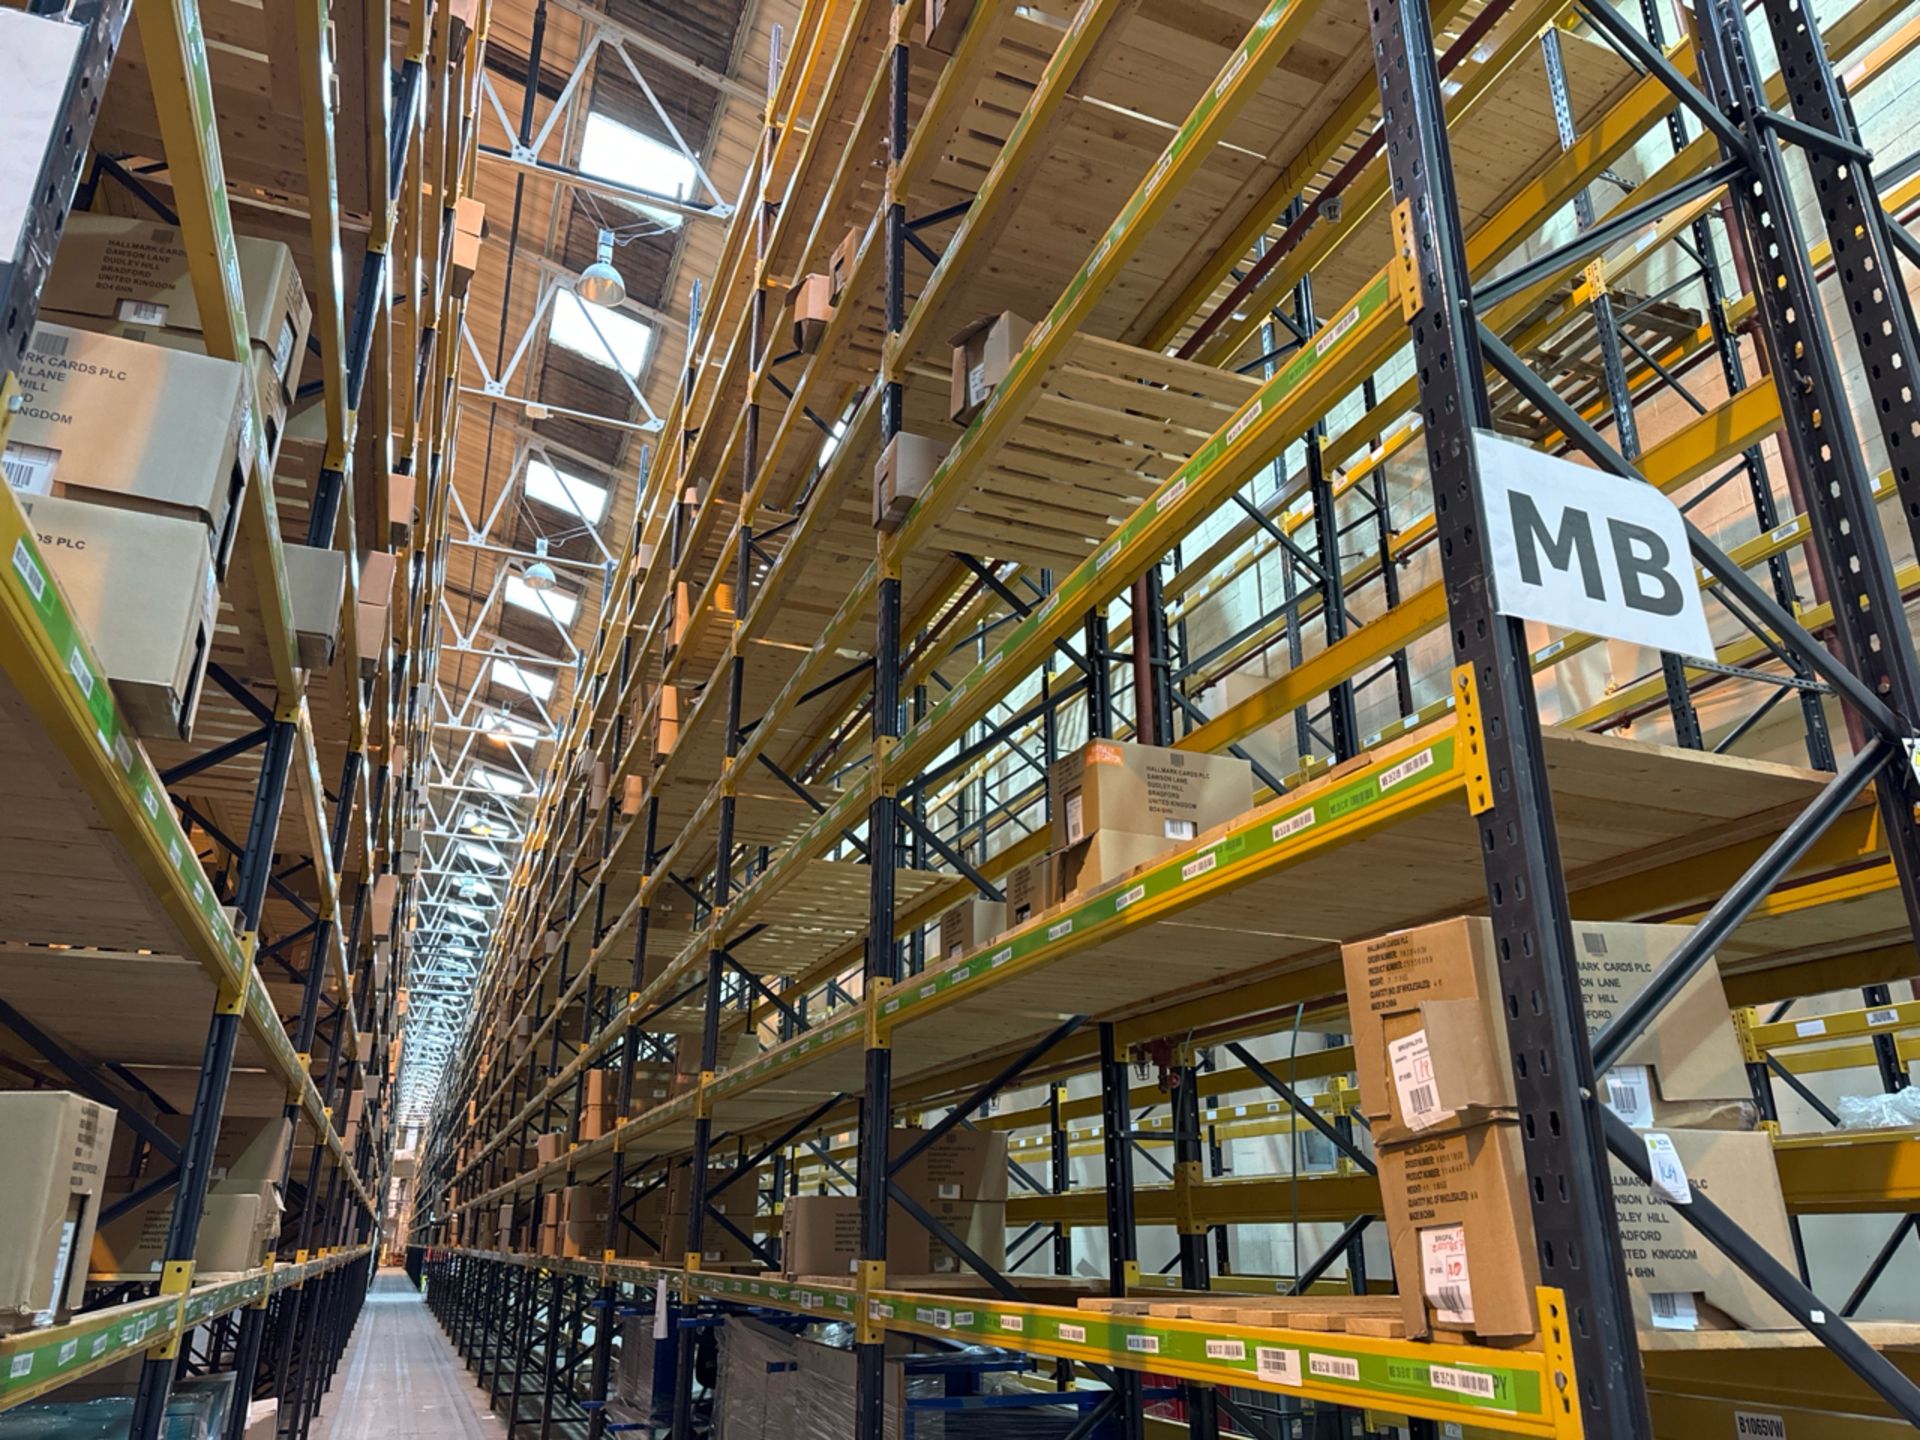 Run Of 18 Bays Of Boltless Industrial Pallet Racking - Image 4 of 15